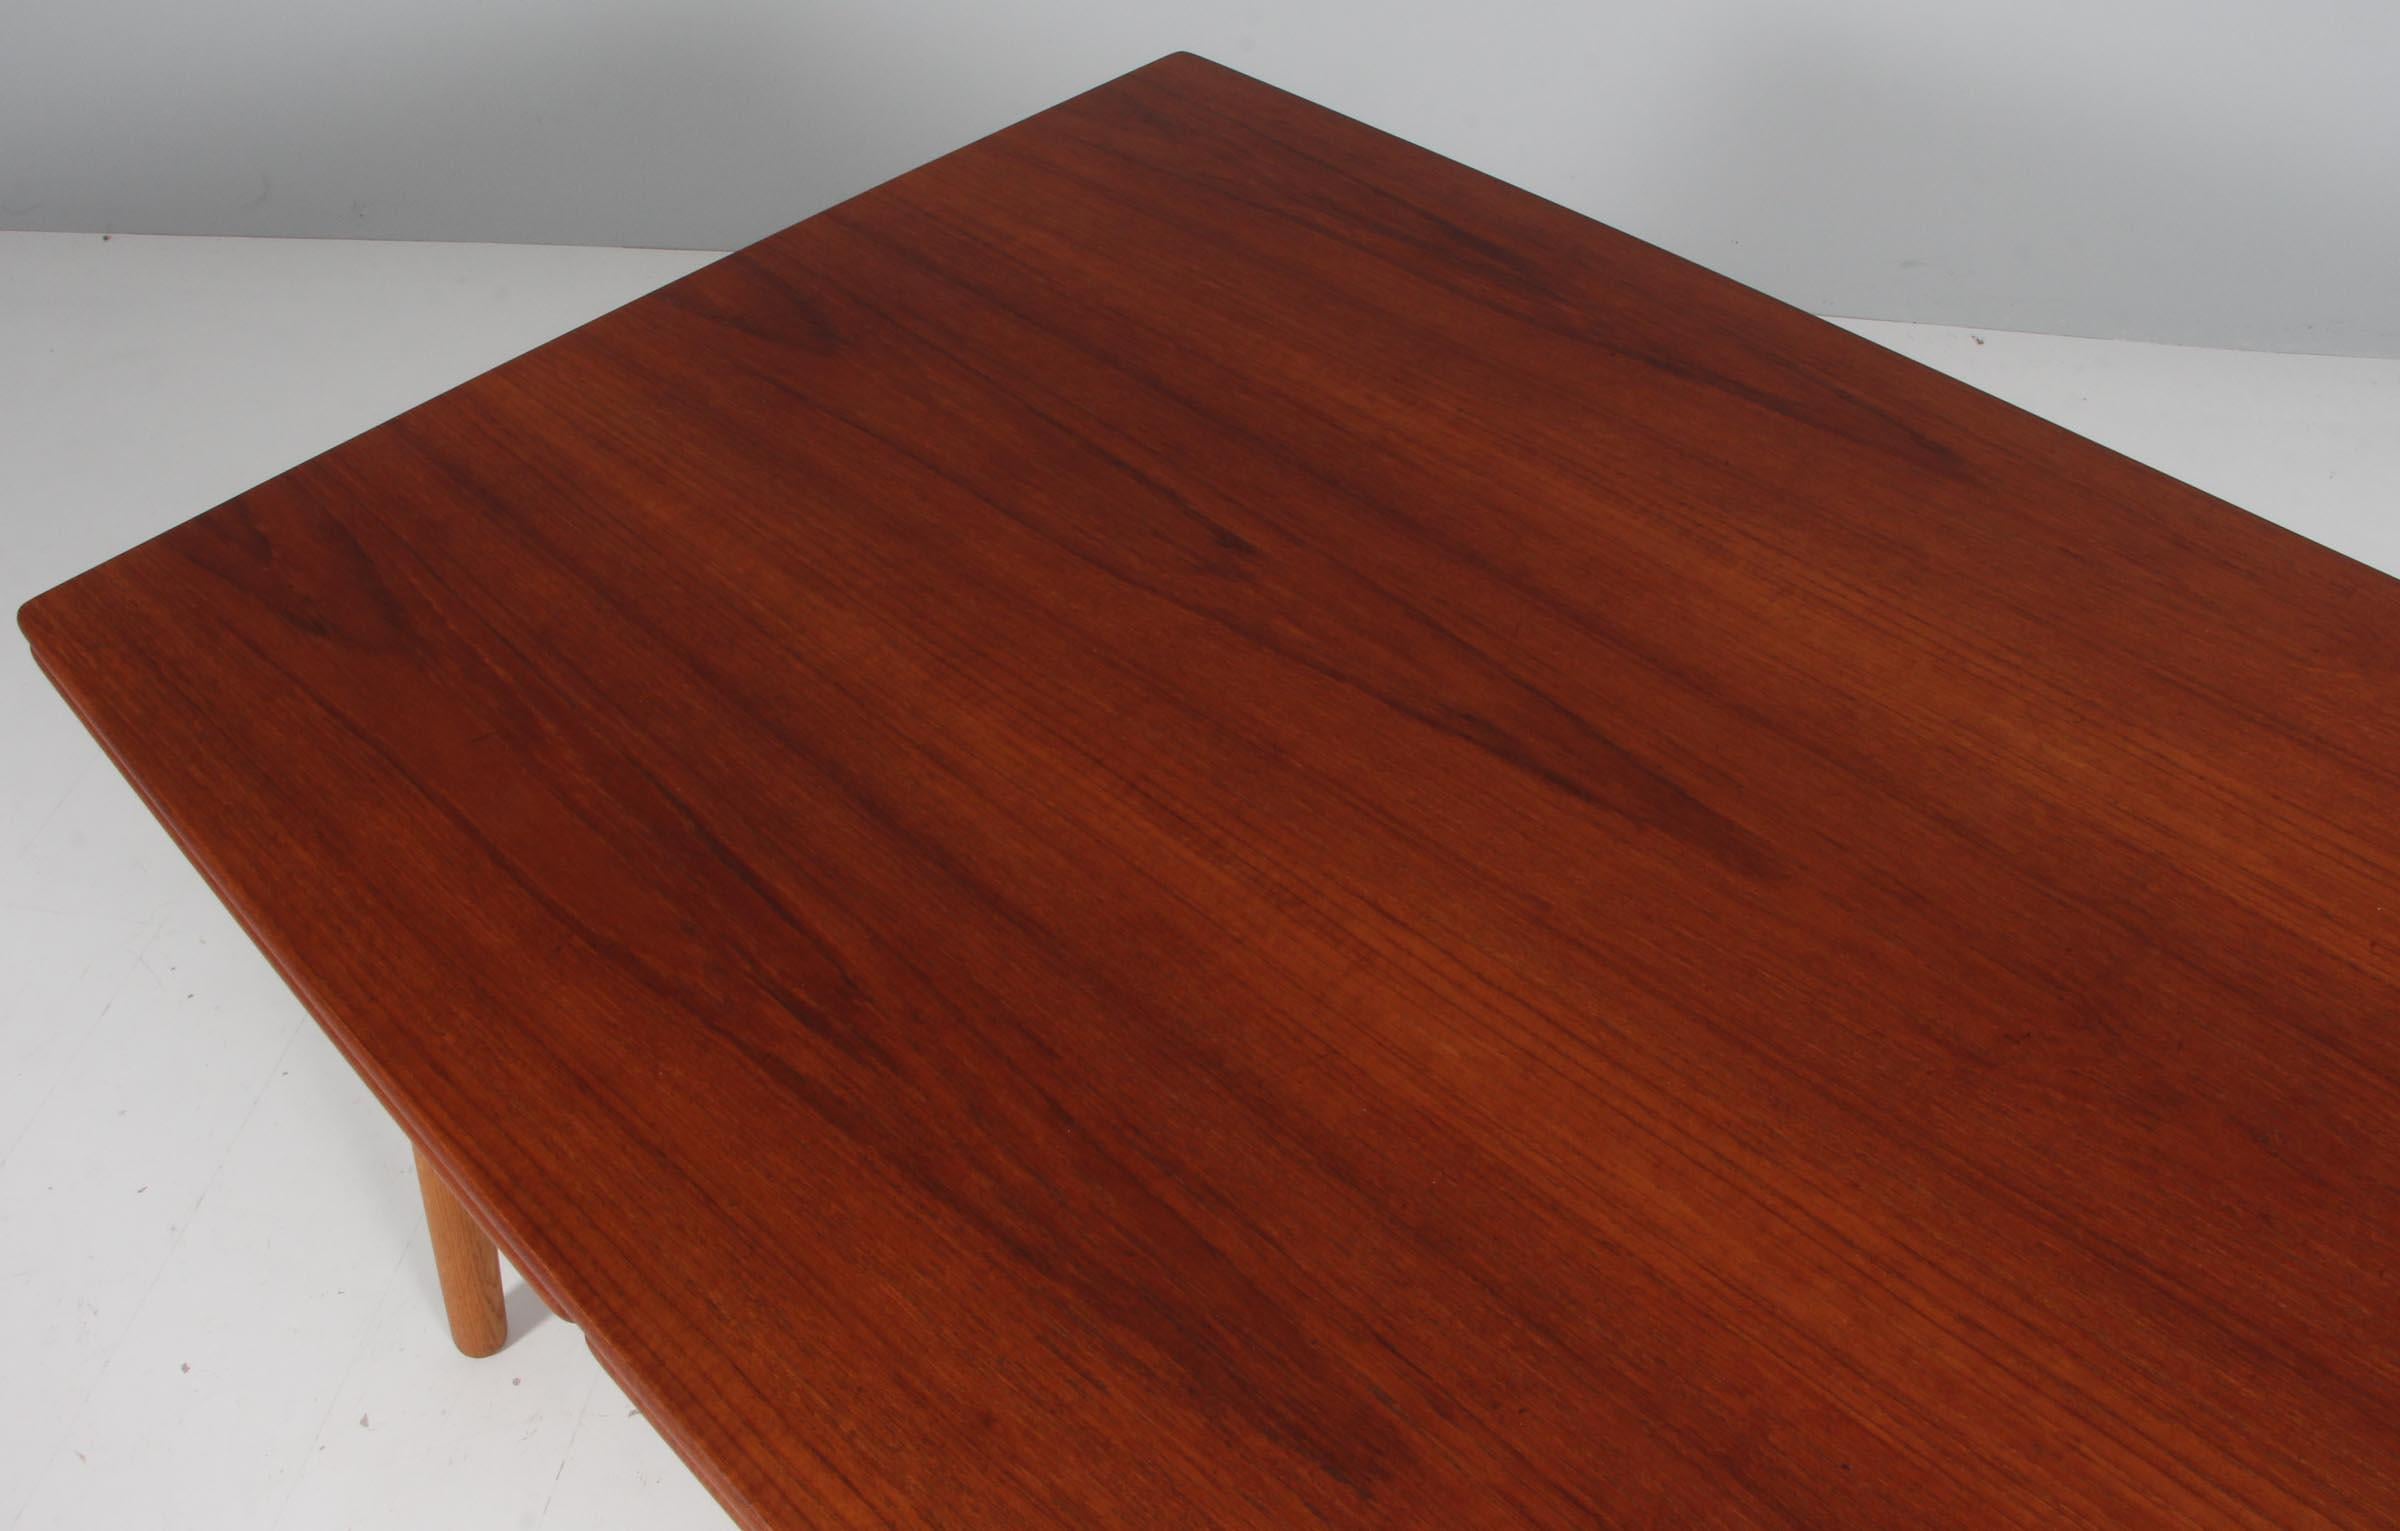 Scandinavian Modern Poul Volther for FDB dining table in teak and oak, extension leafes.